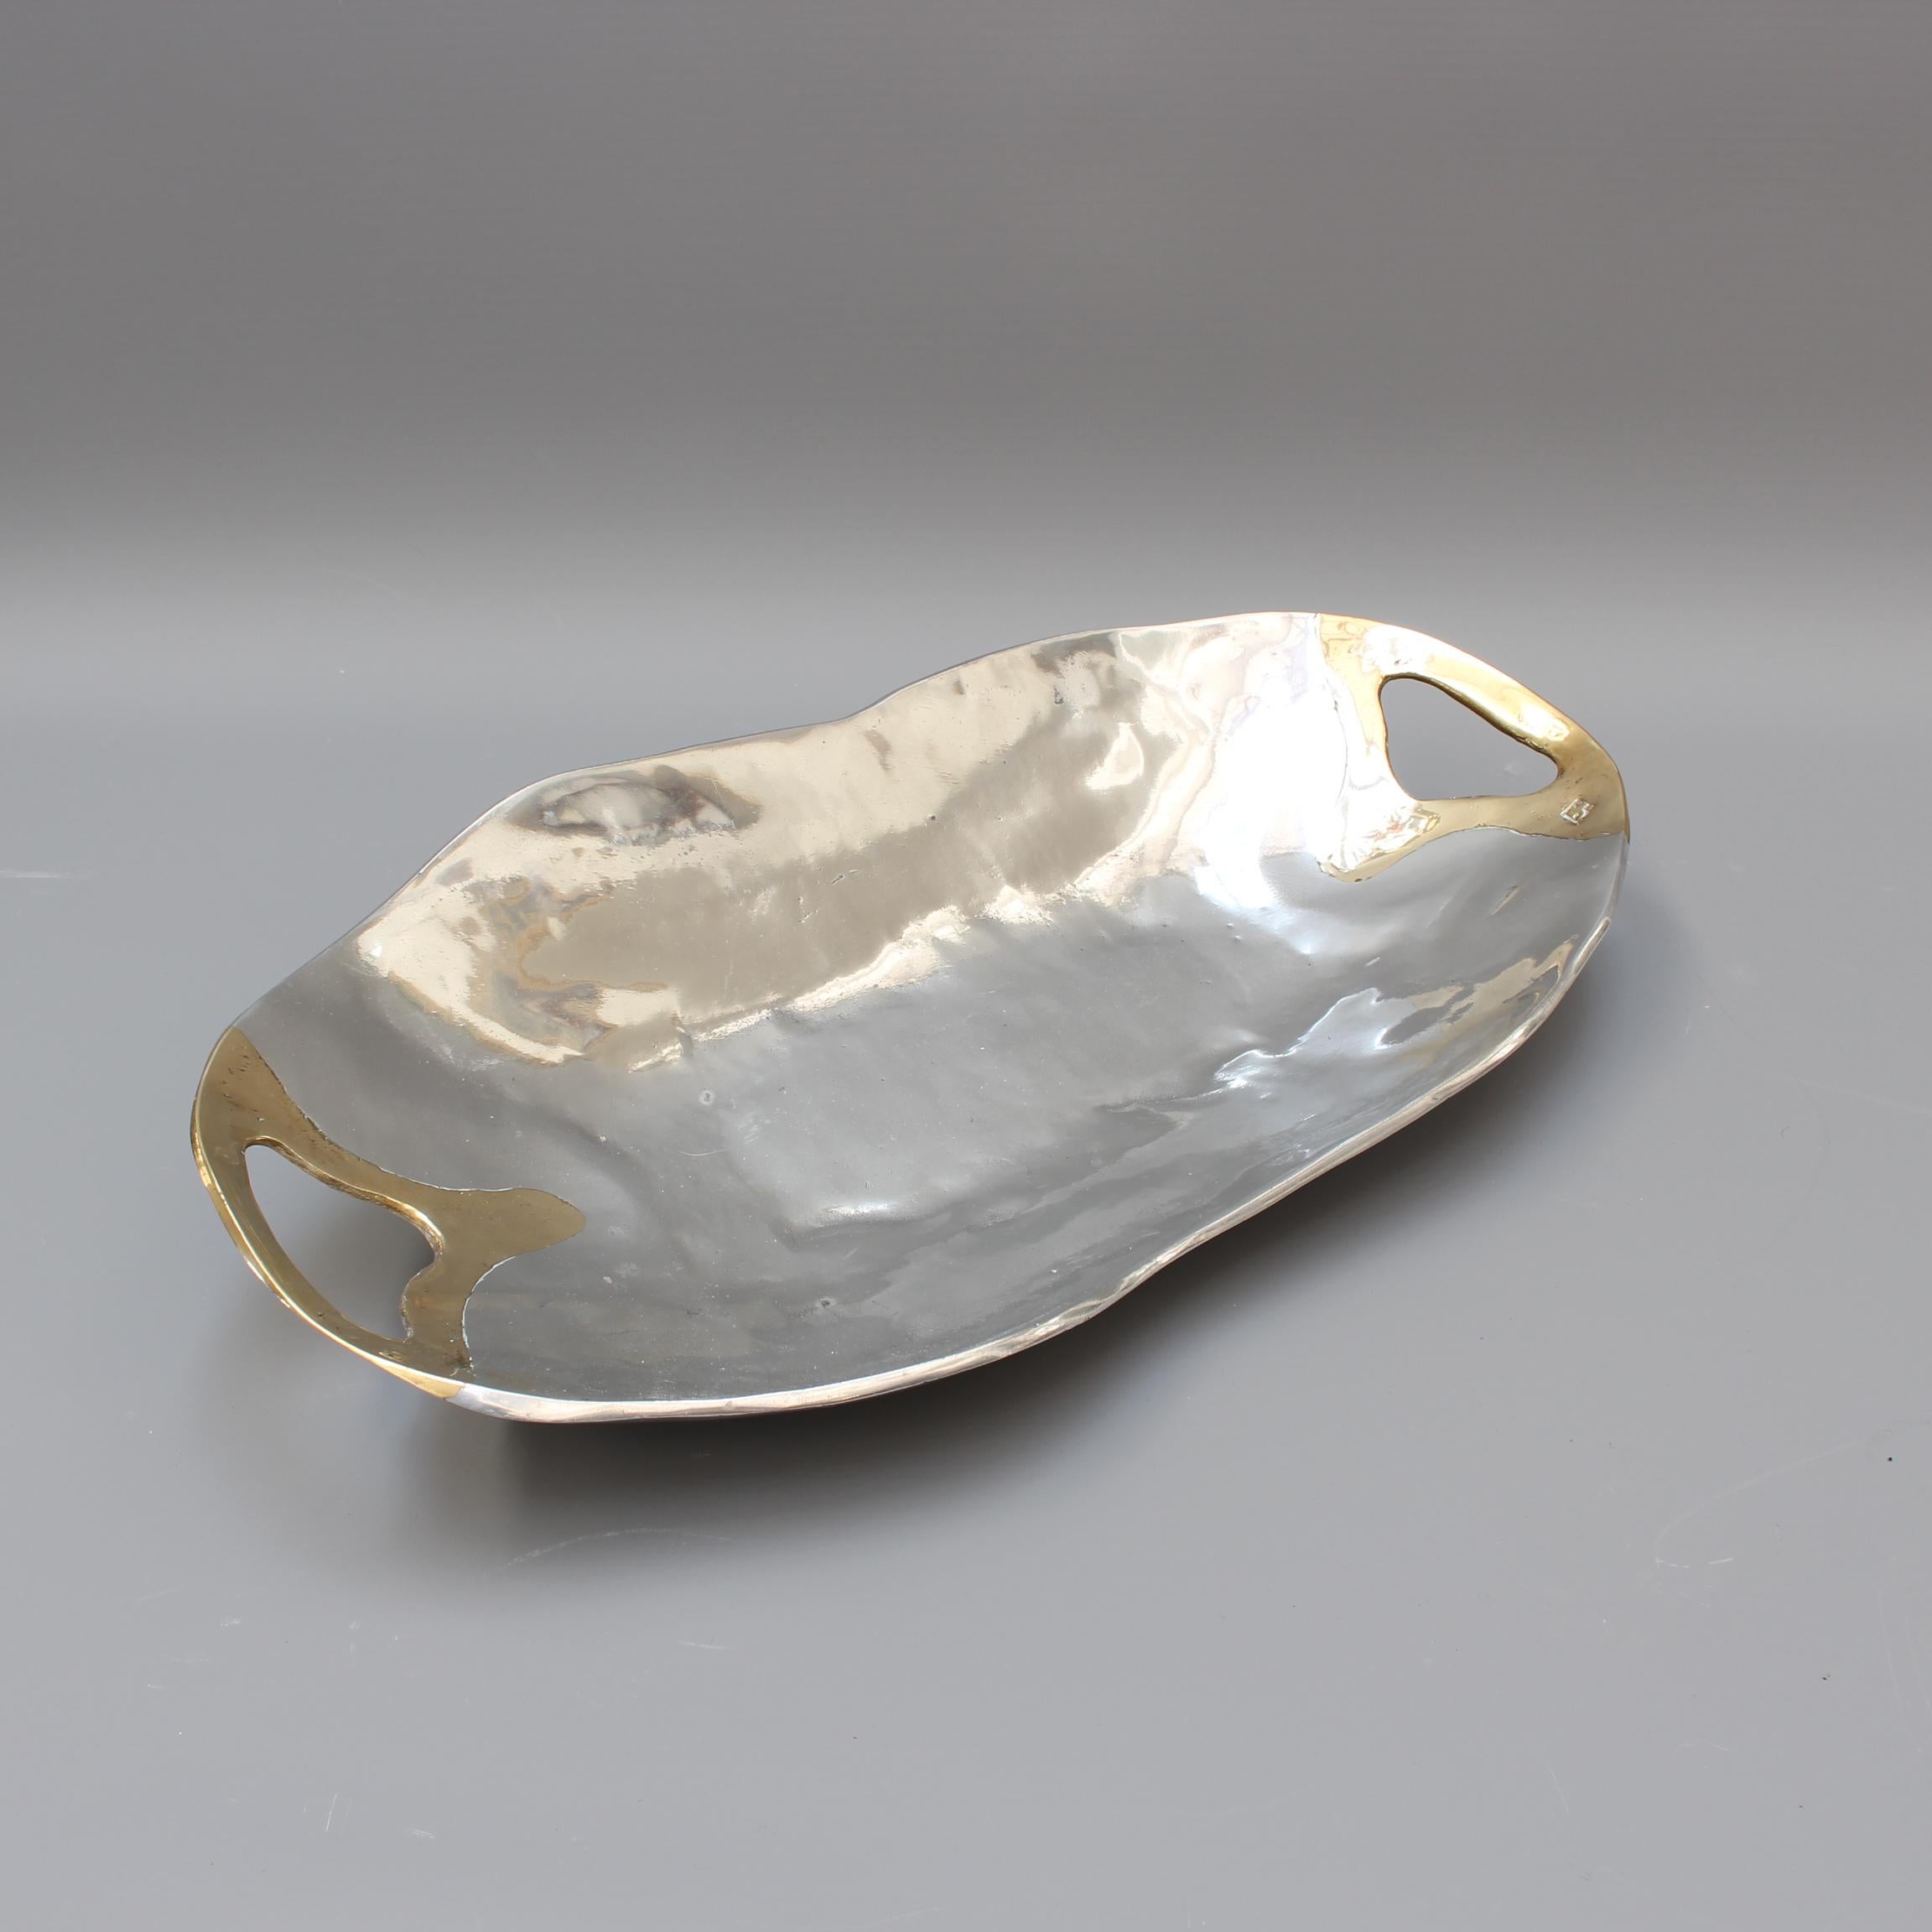 Aluminium and Brass Brutalist Style Tray by David Marshall (1970s) - Large 7